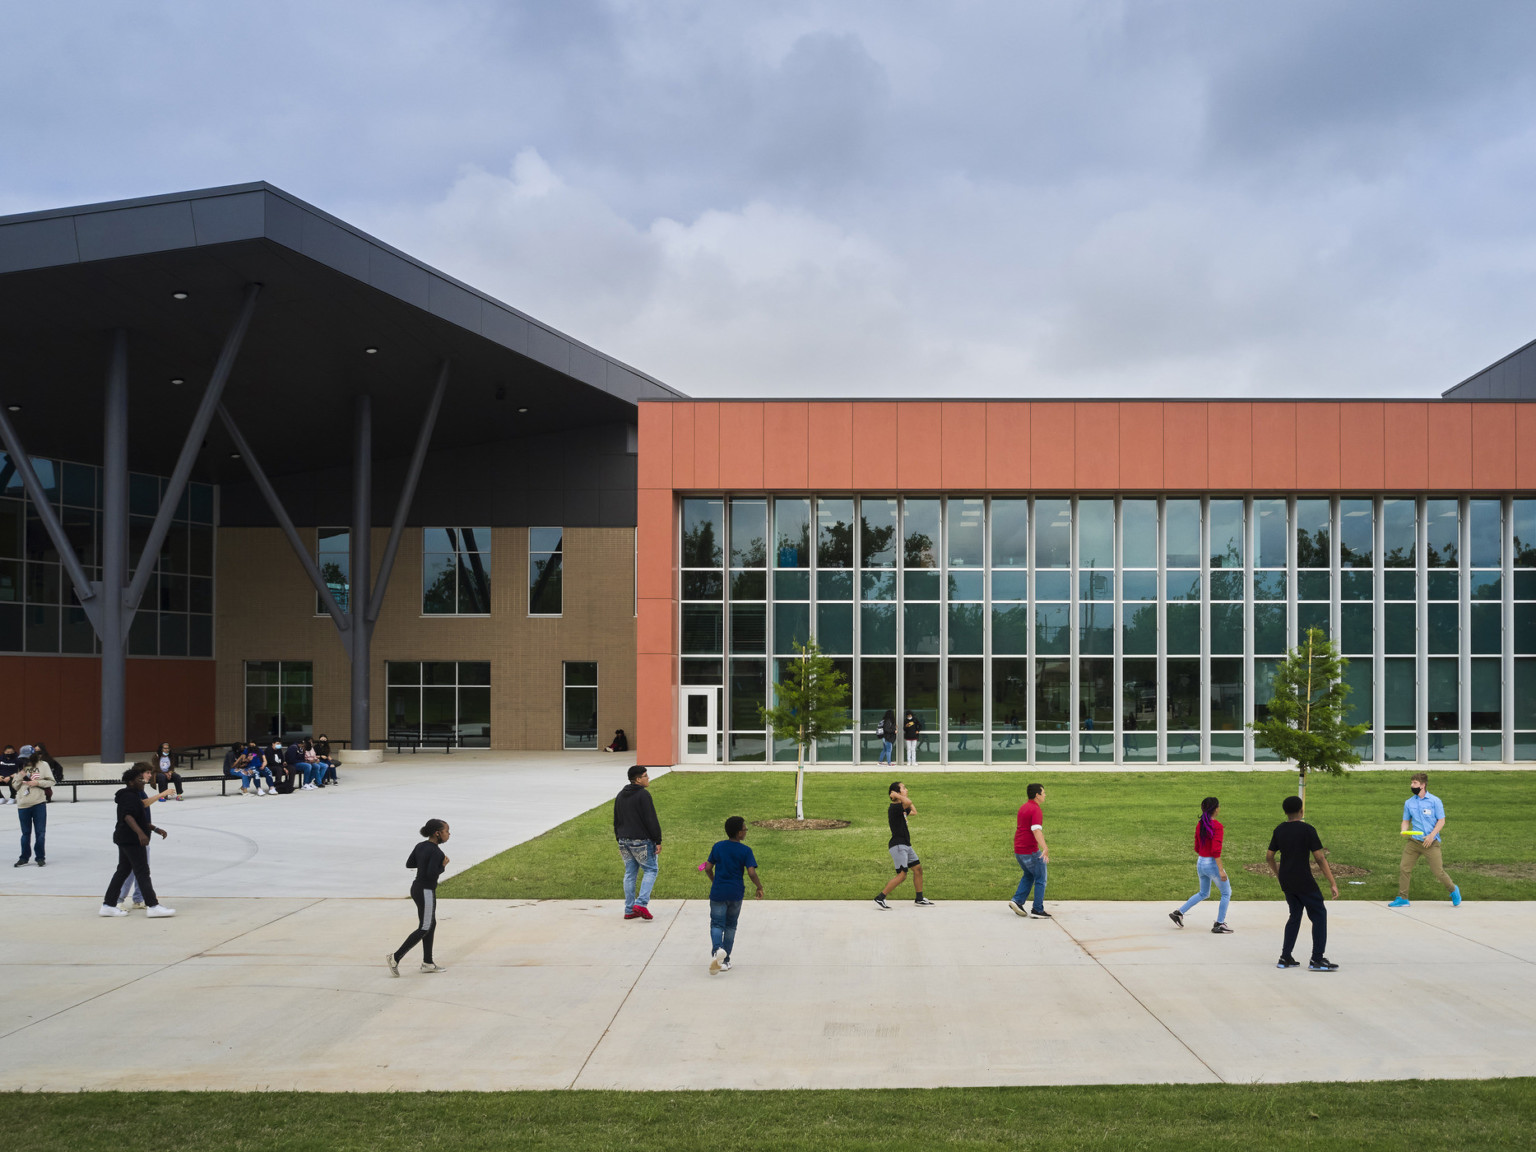 James L. Capps Middle School exterior with angled black shelter brick building. Orange wrap facade over double height glass